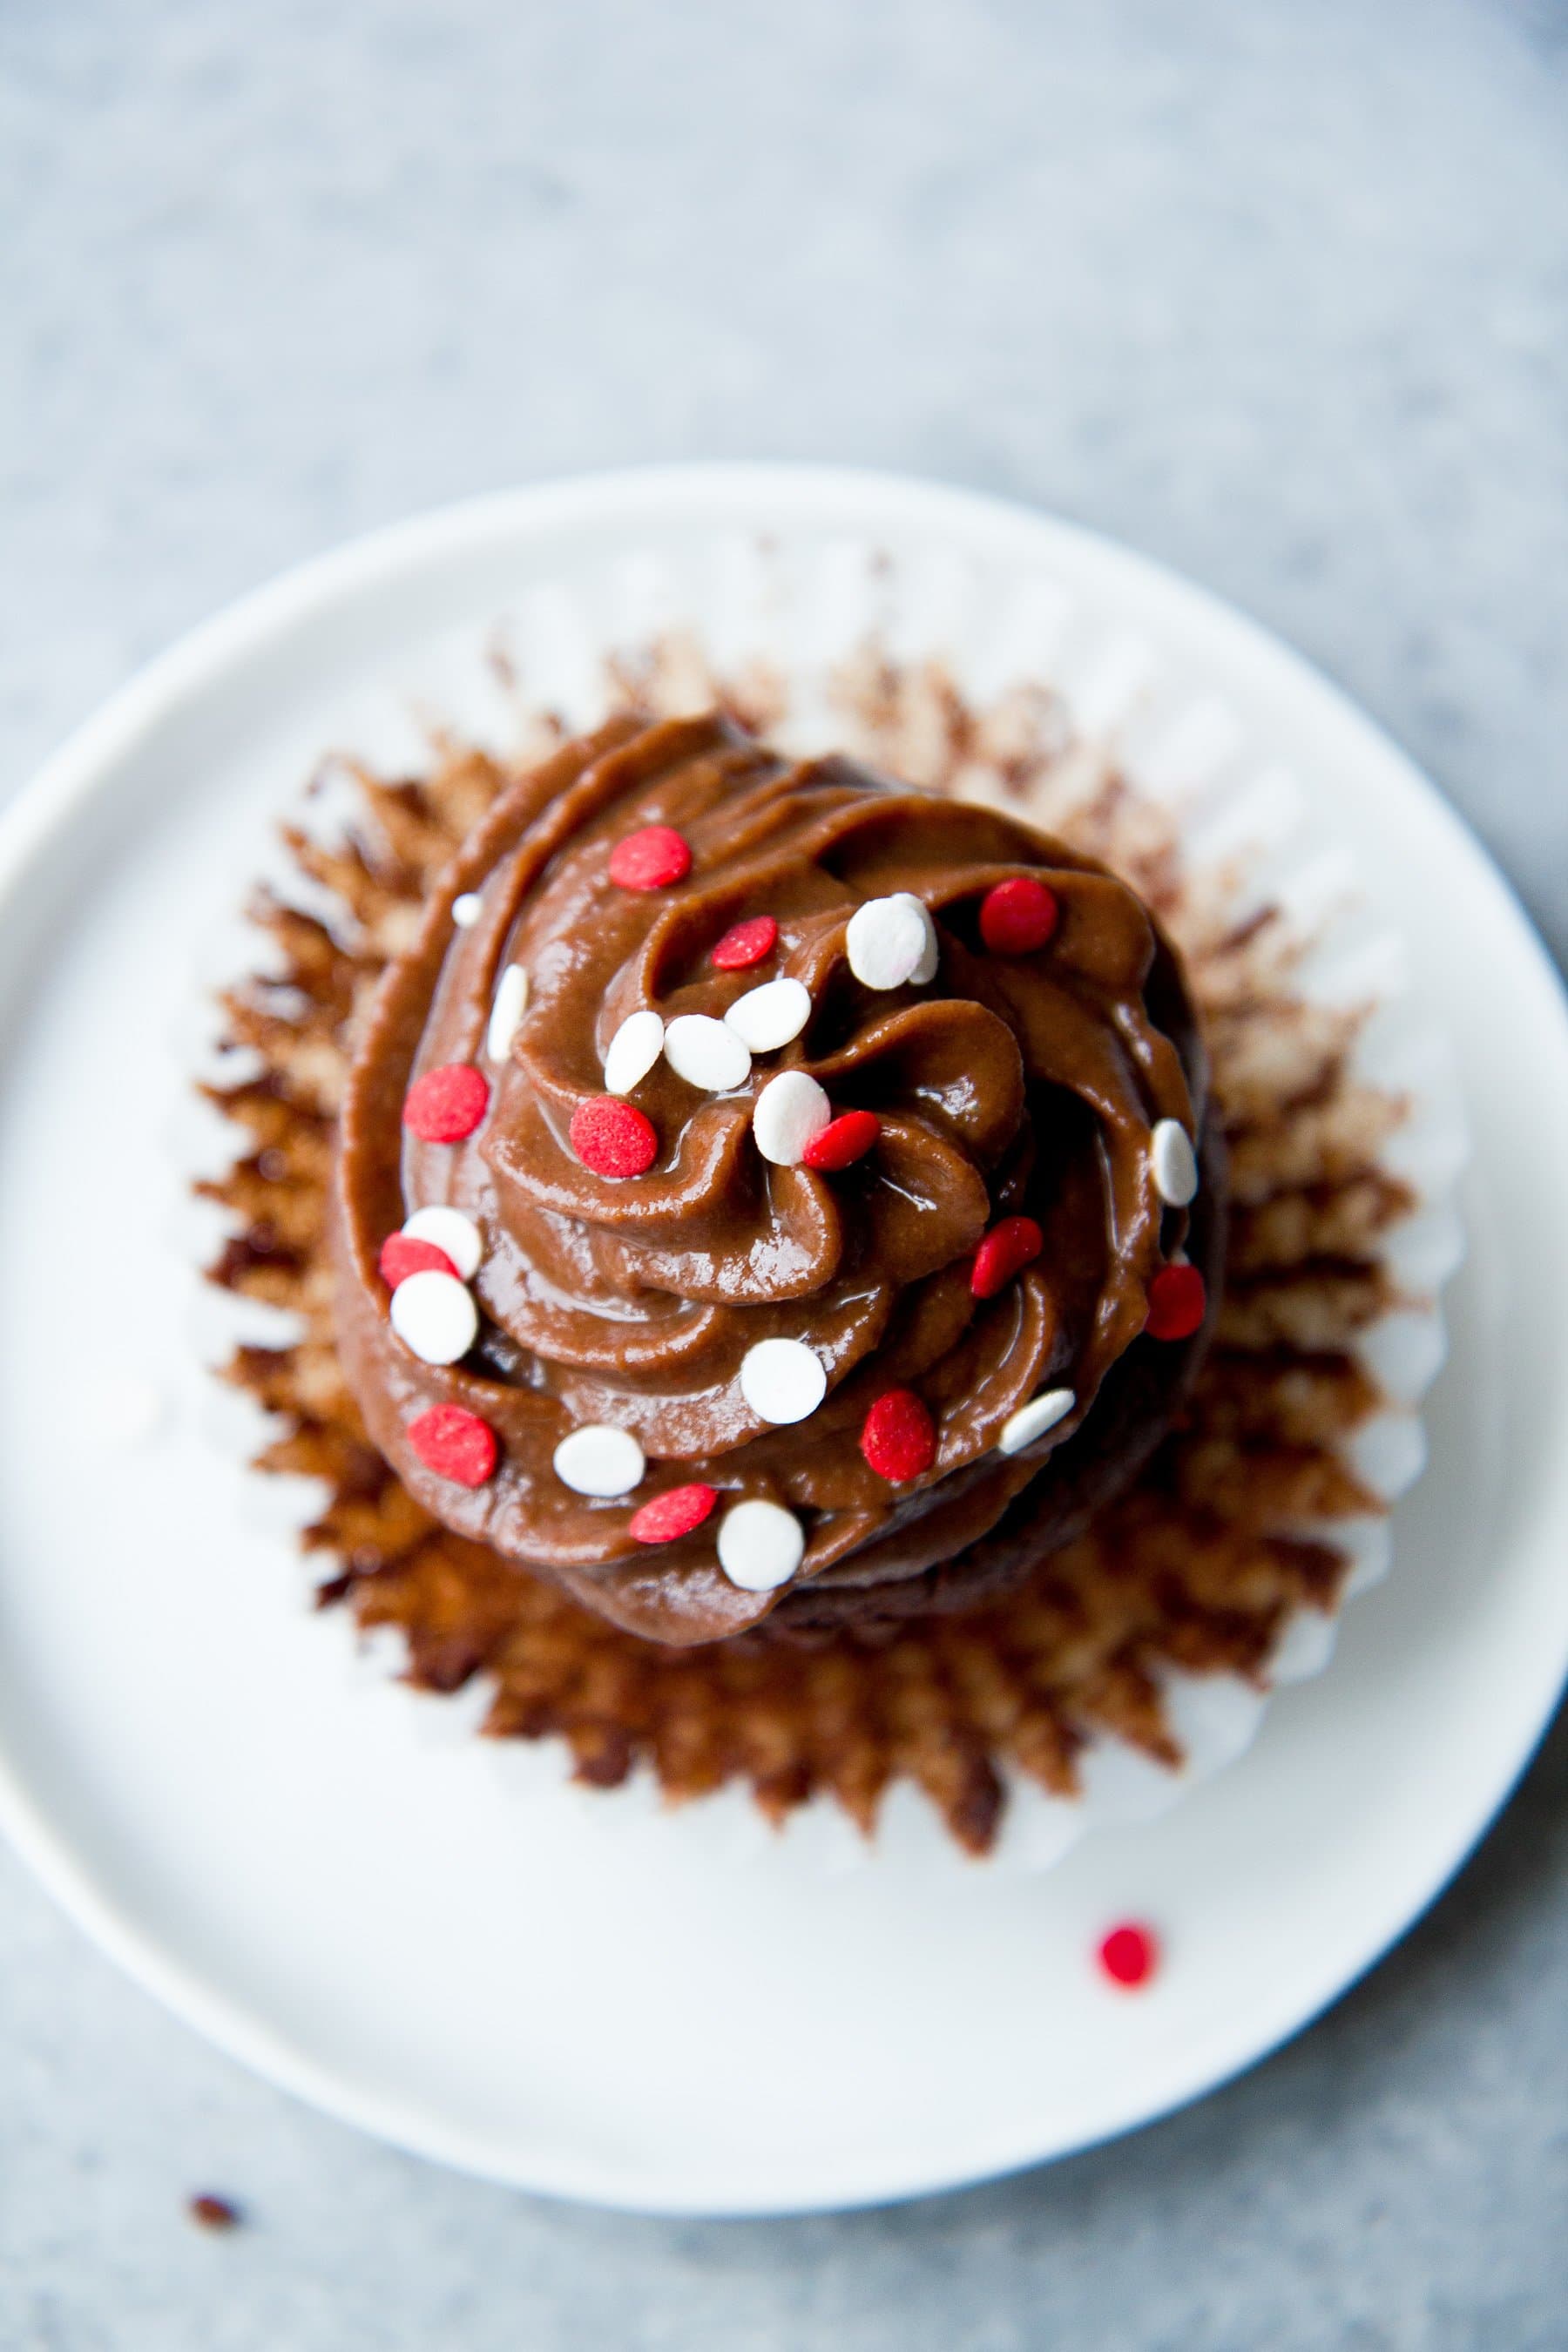 An unwrapped healthier chocolate cupcake sits on a white plate.